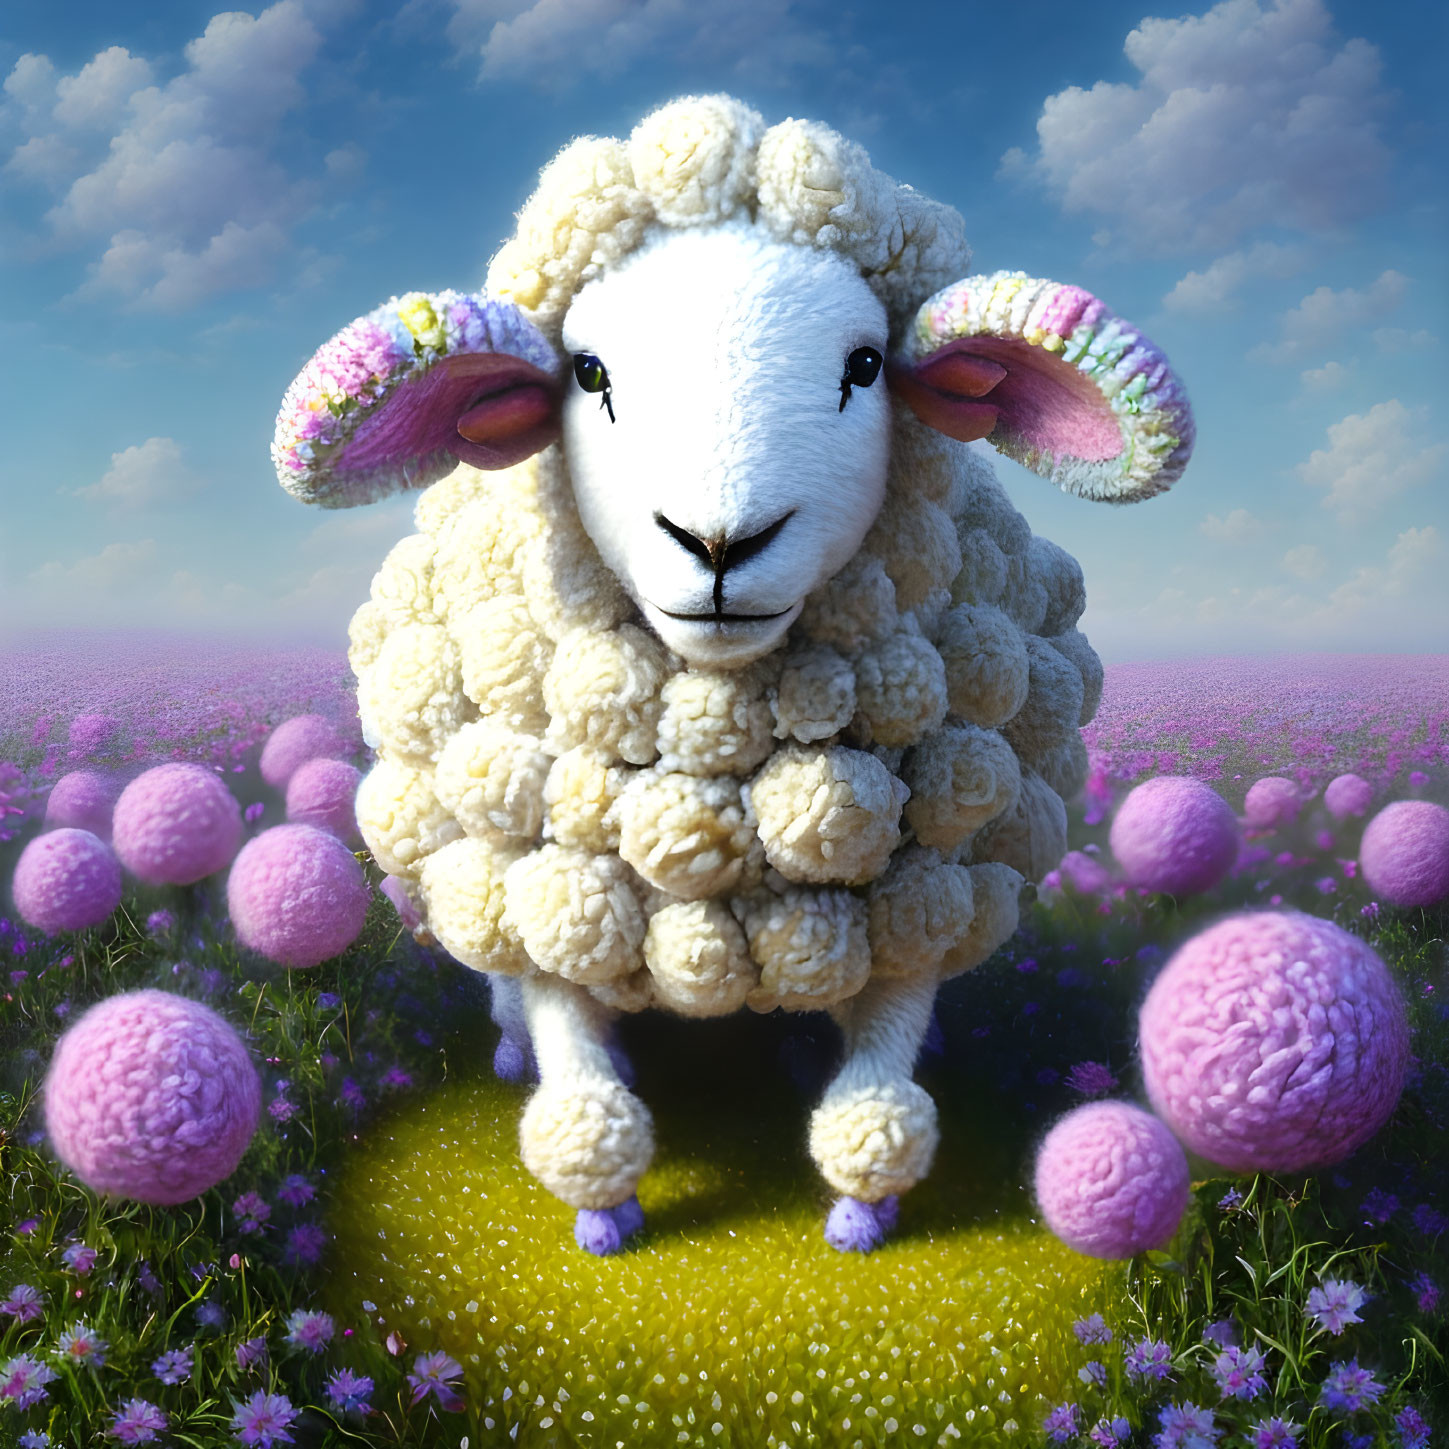 Fluffy sheep with pastel ears in vibrant meadow full of pink flowers